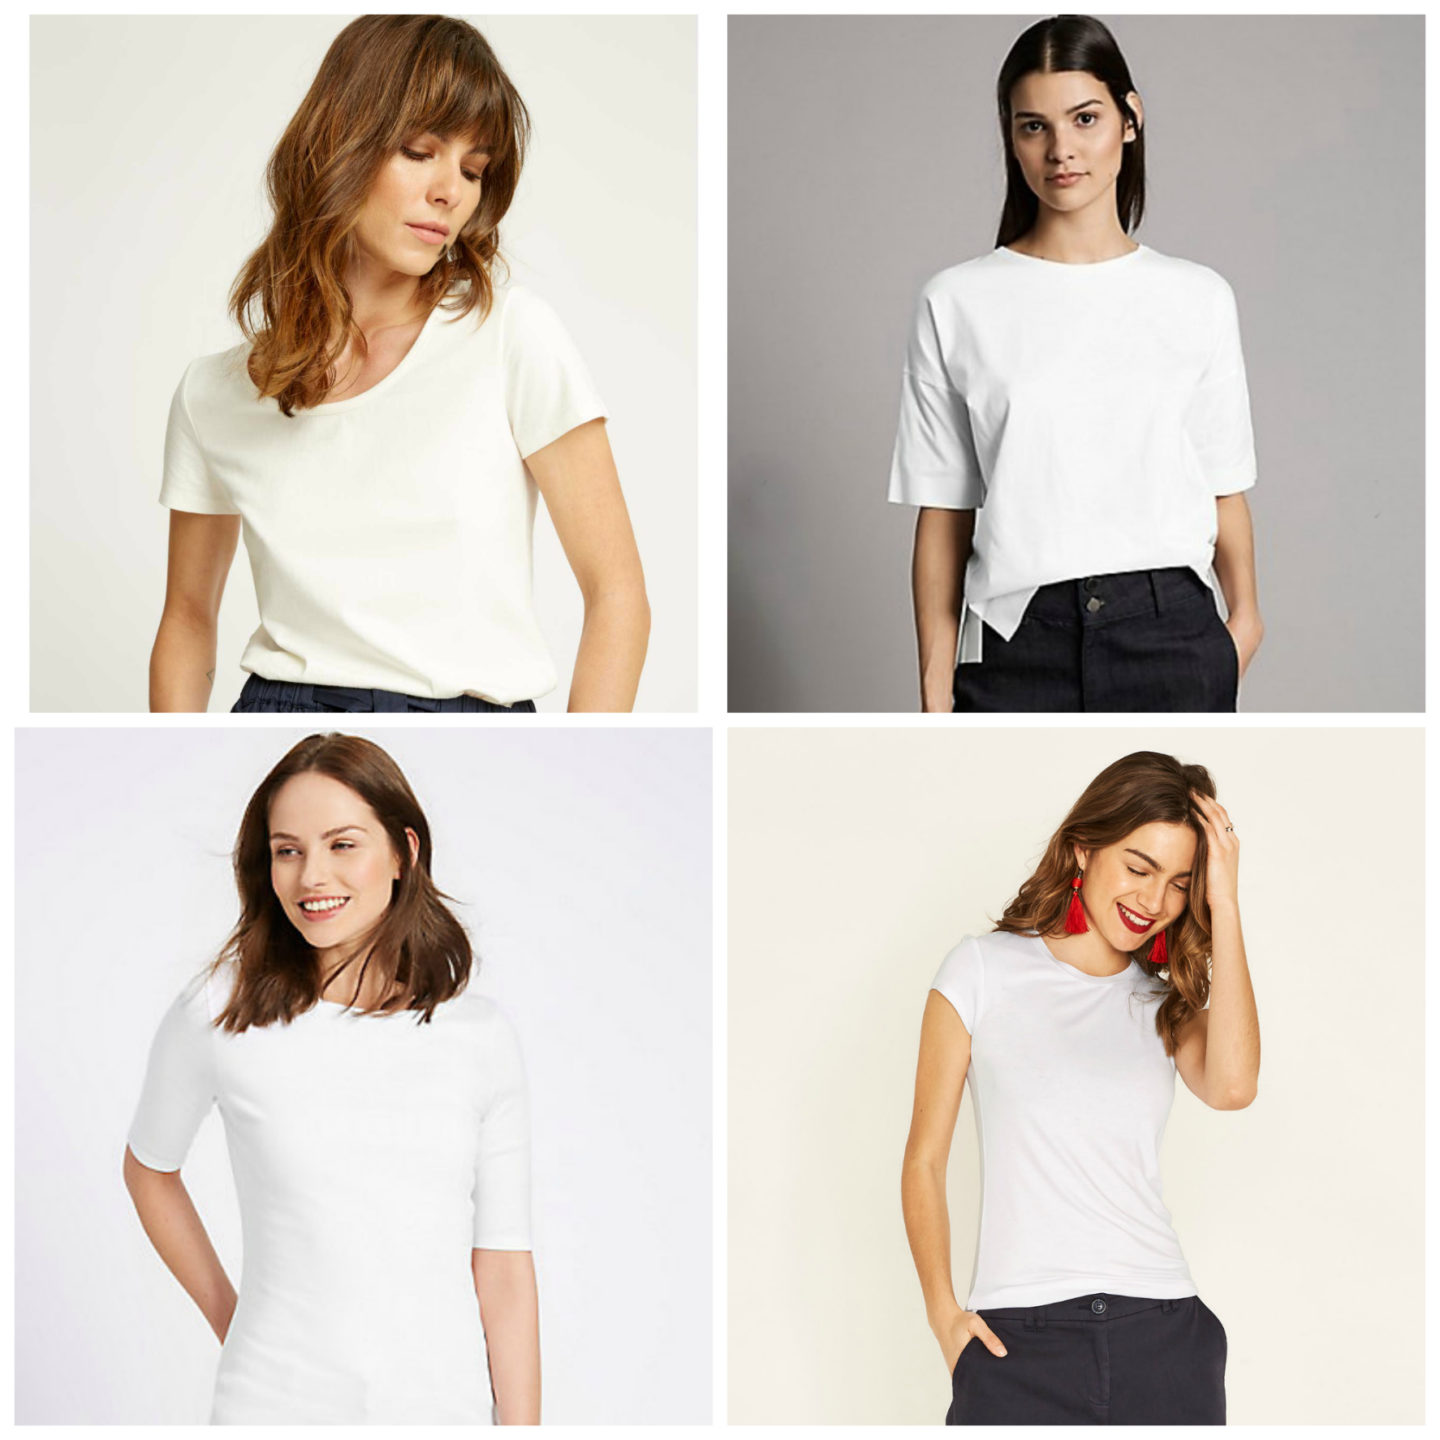 Chic and Comfortable: Oversized Women's Tees for Any Occasion